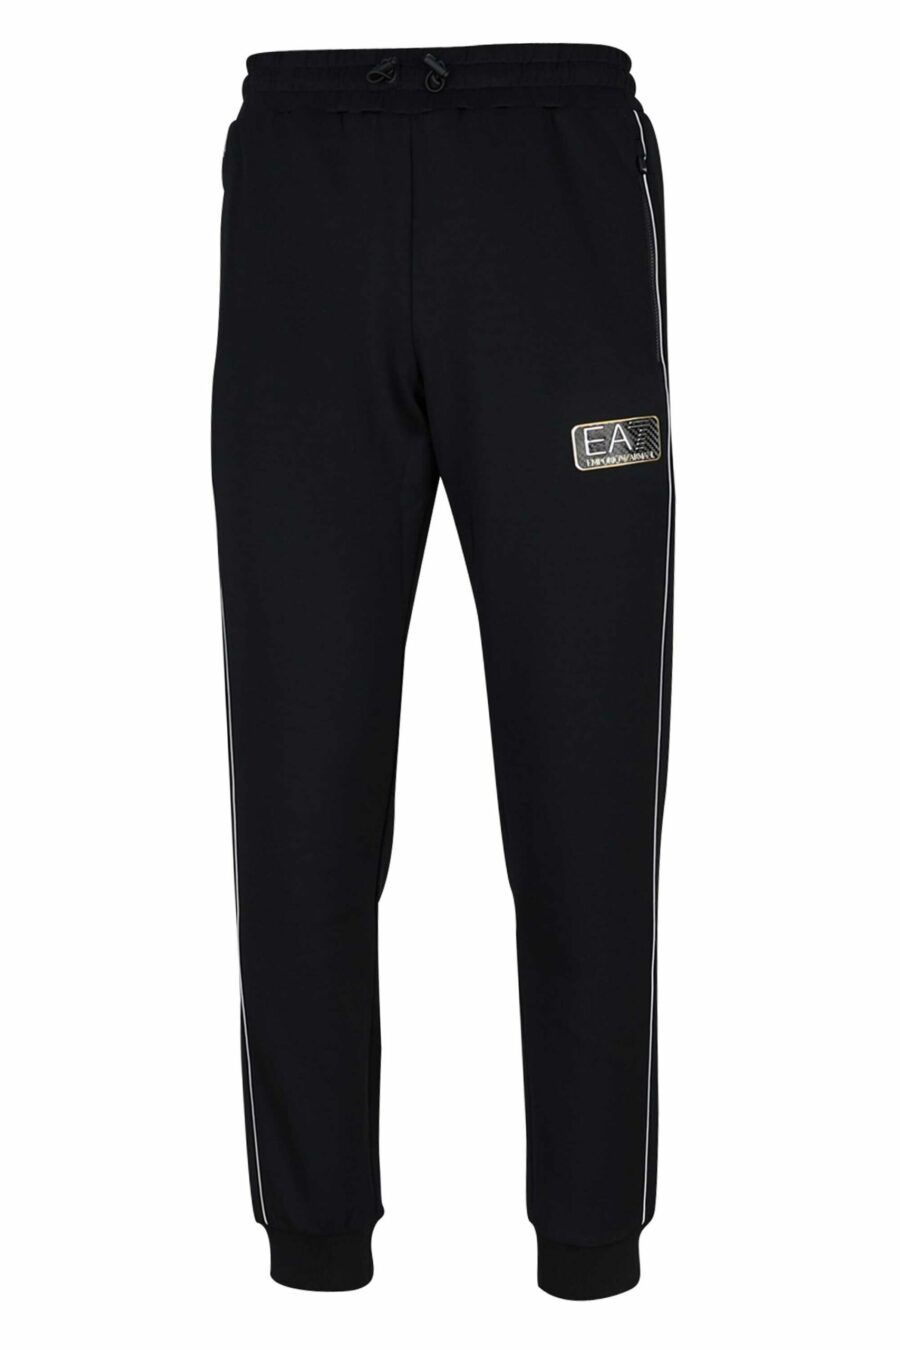 Tracksuit bottoms black with white stripes and metal logo "lux identity" - 8057767646189 scaled